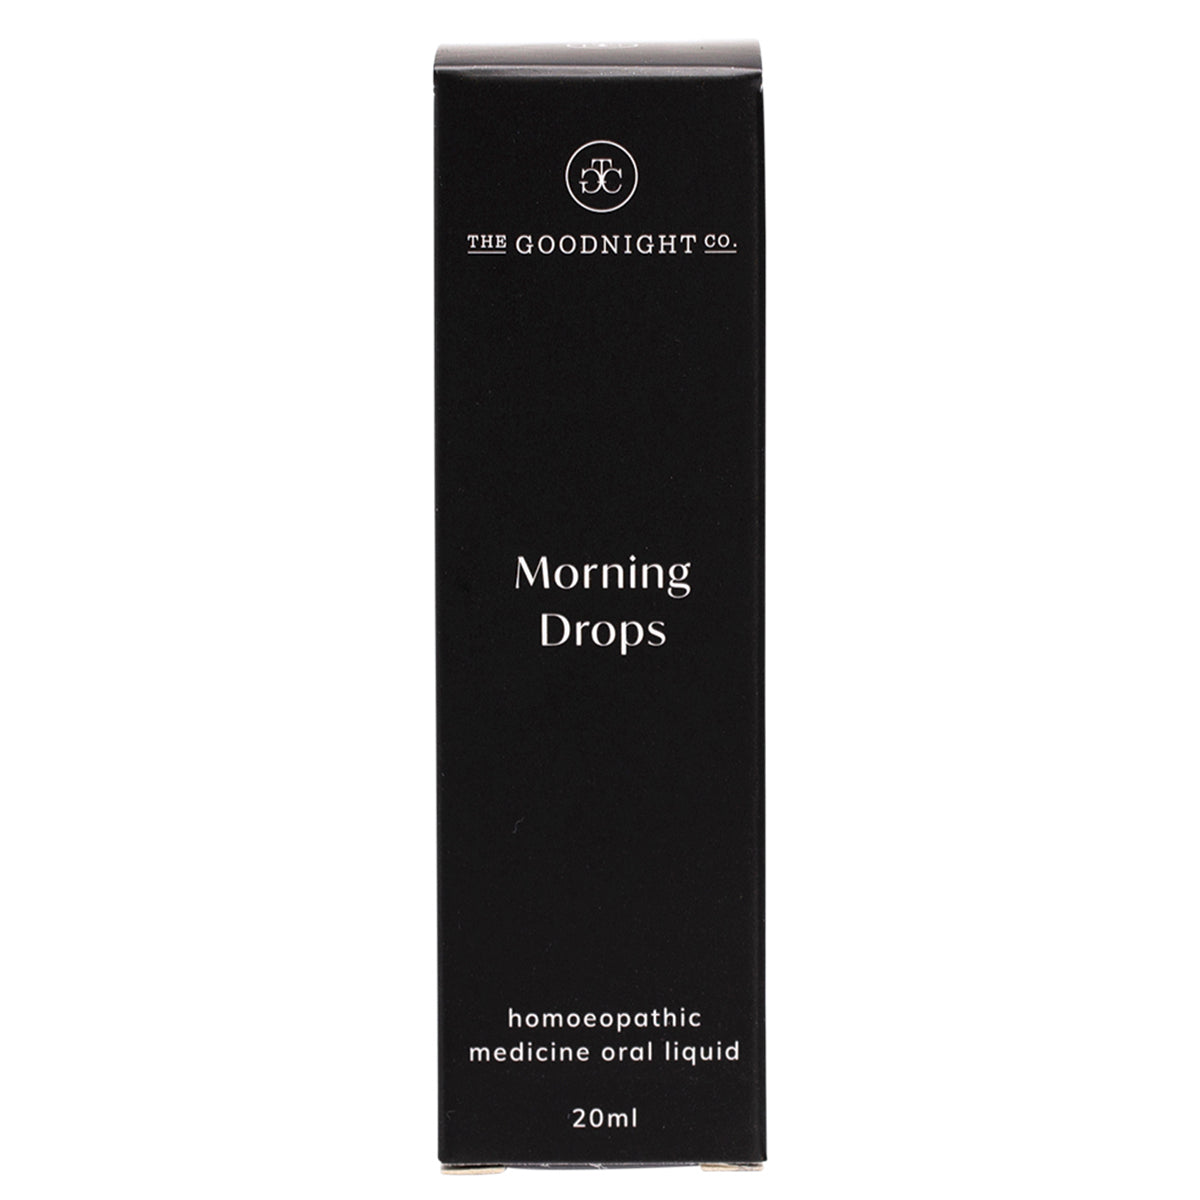 The Goodnight Co Morning Drops Homeopathic Medicine Oral Liquid 20mL